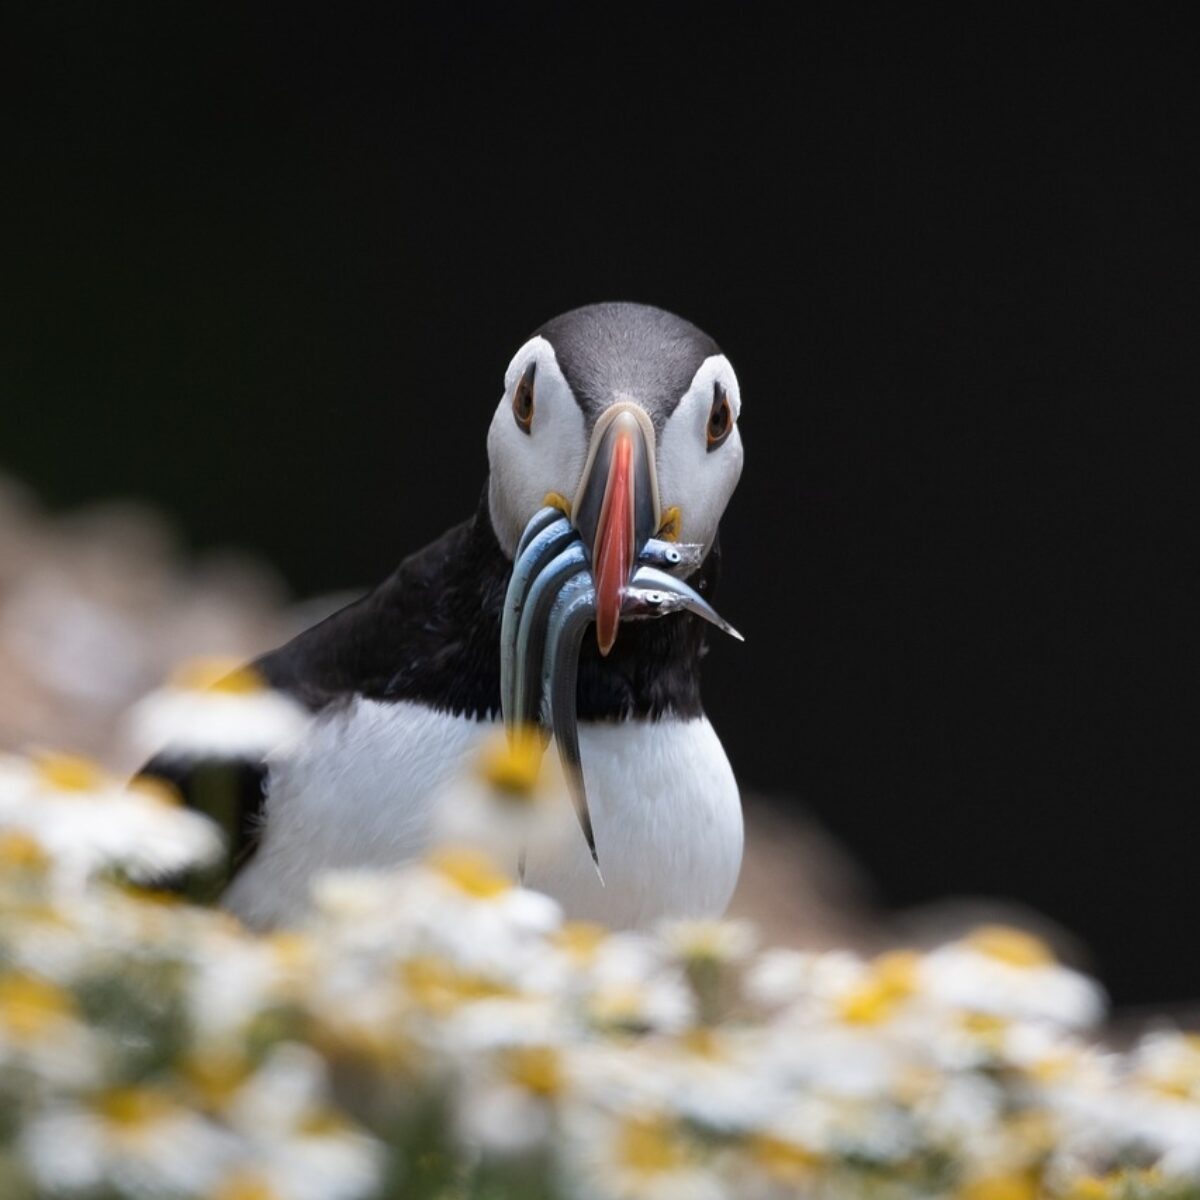 Puffin with fish in its mouth